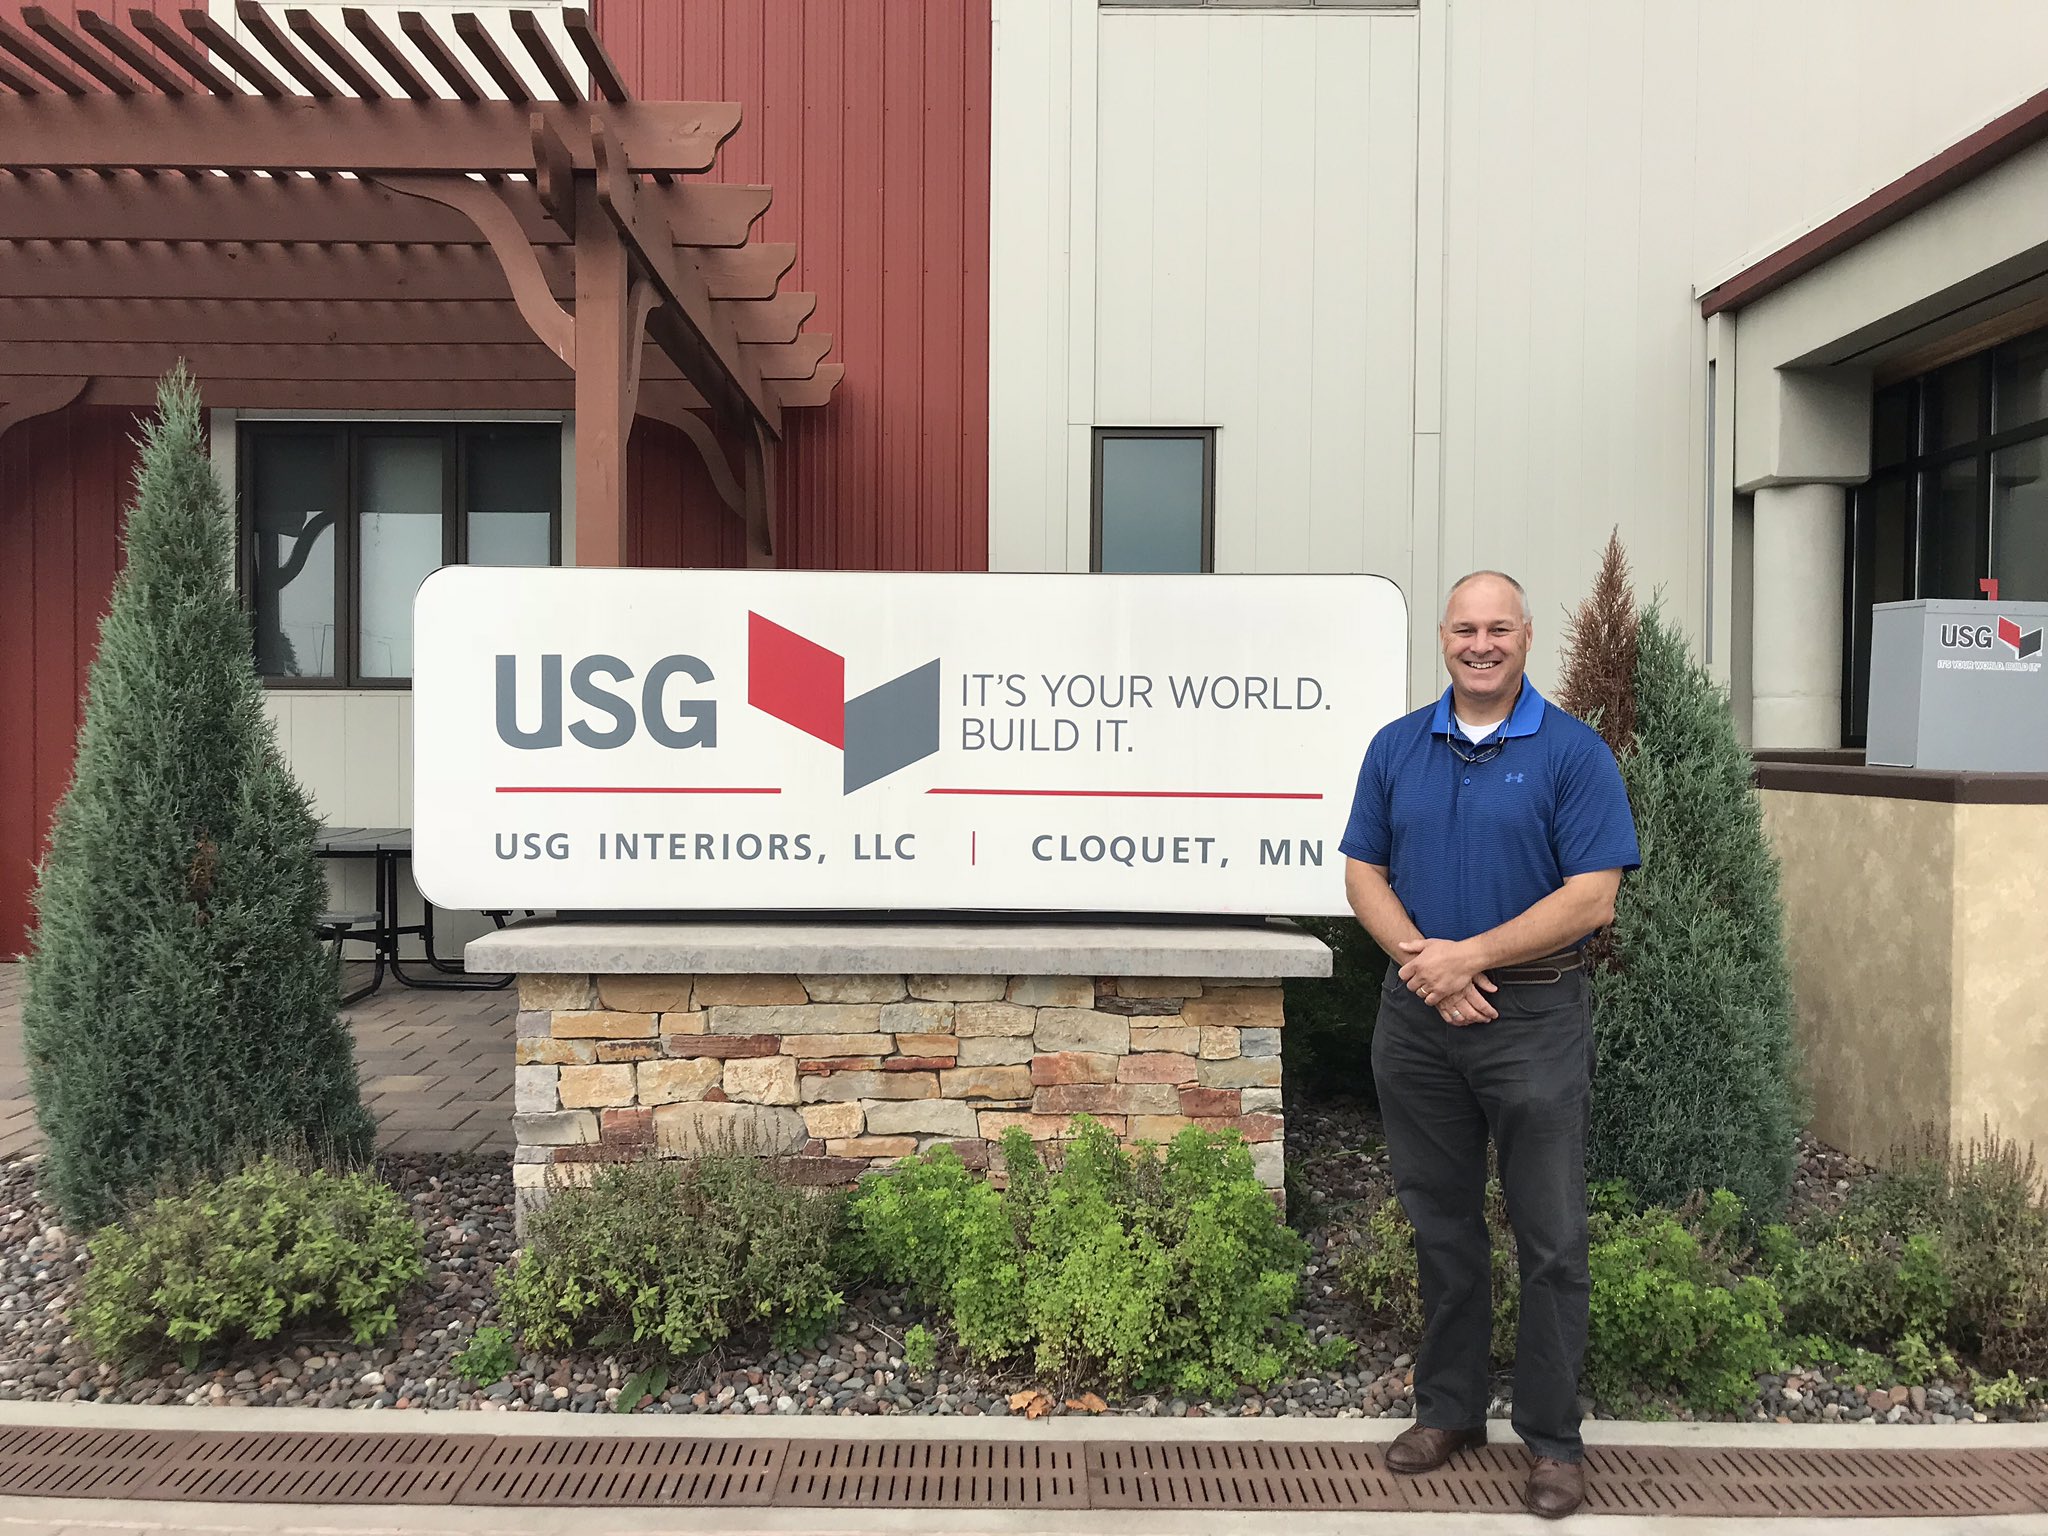 Pete Stauber On Twitter We Had An Awesome Time Touring Usg